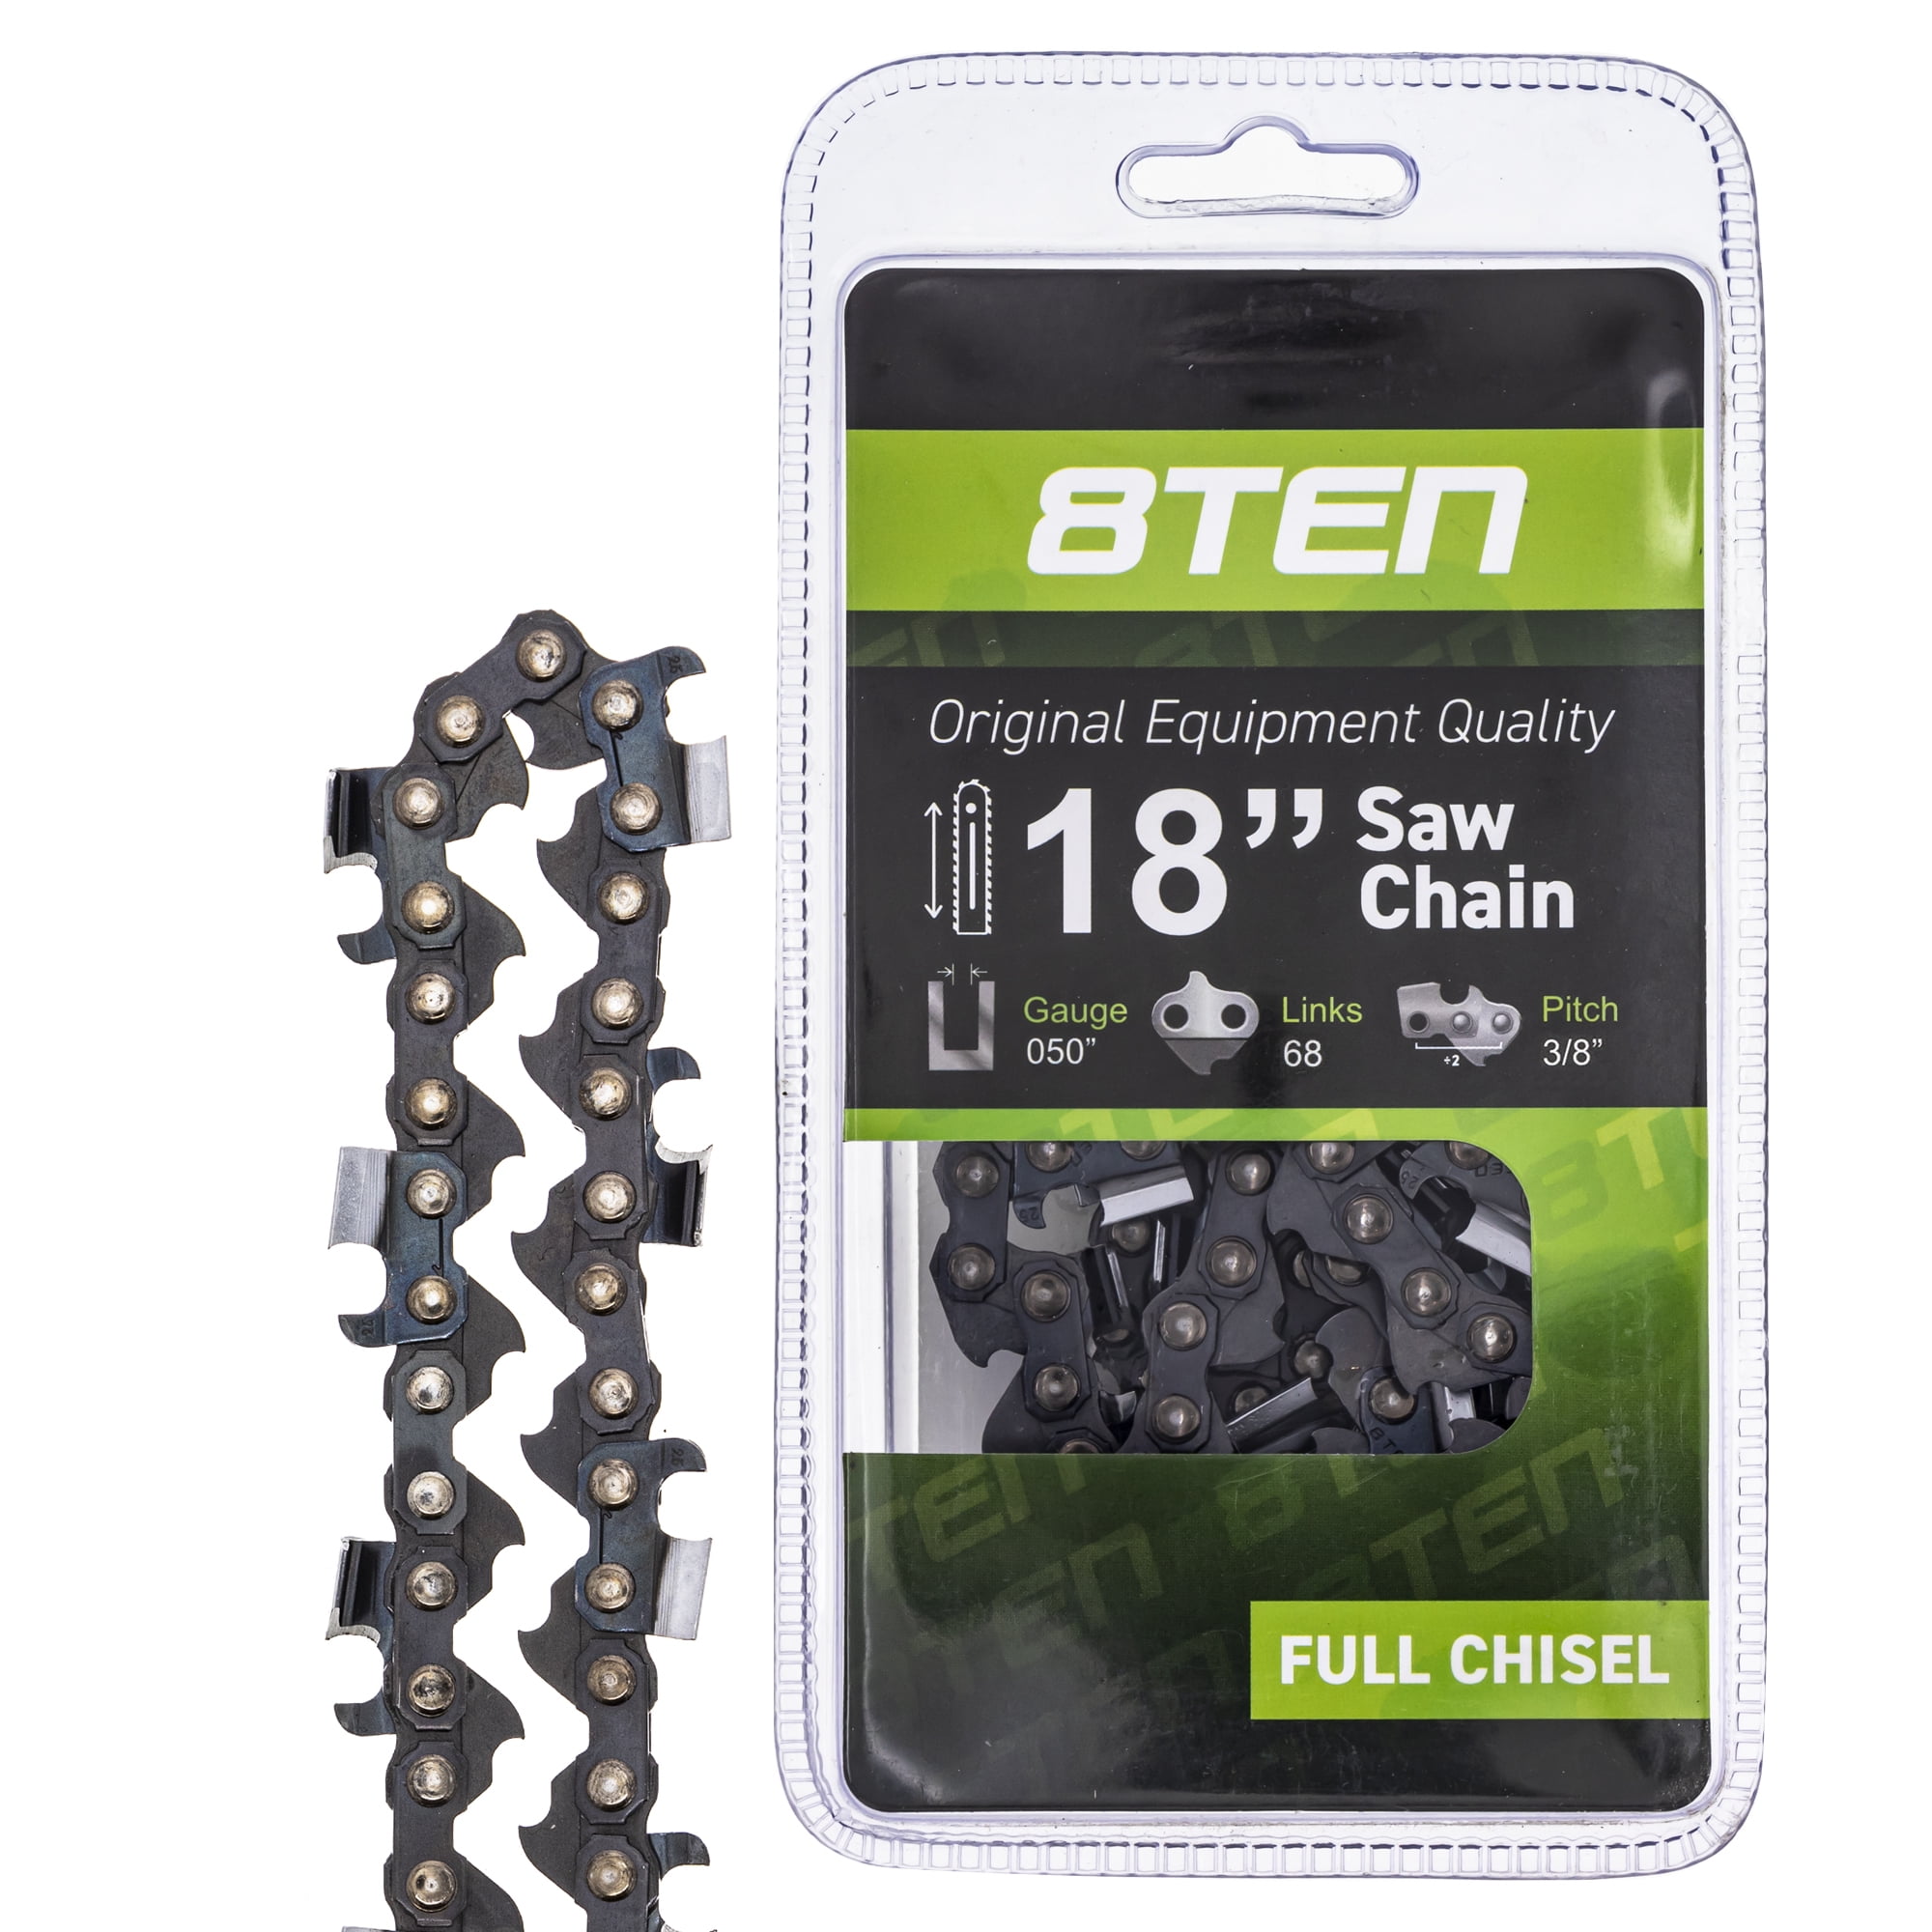 72 Drive Links .325" Pitch Details about   952051313 Husqvarna 18" Chainsaw Chain 